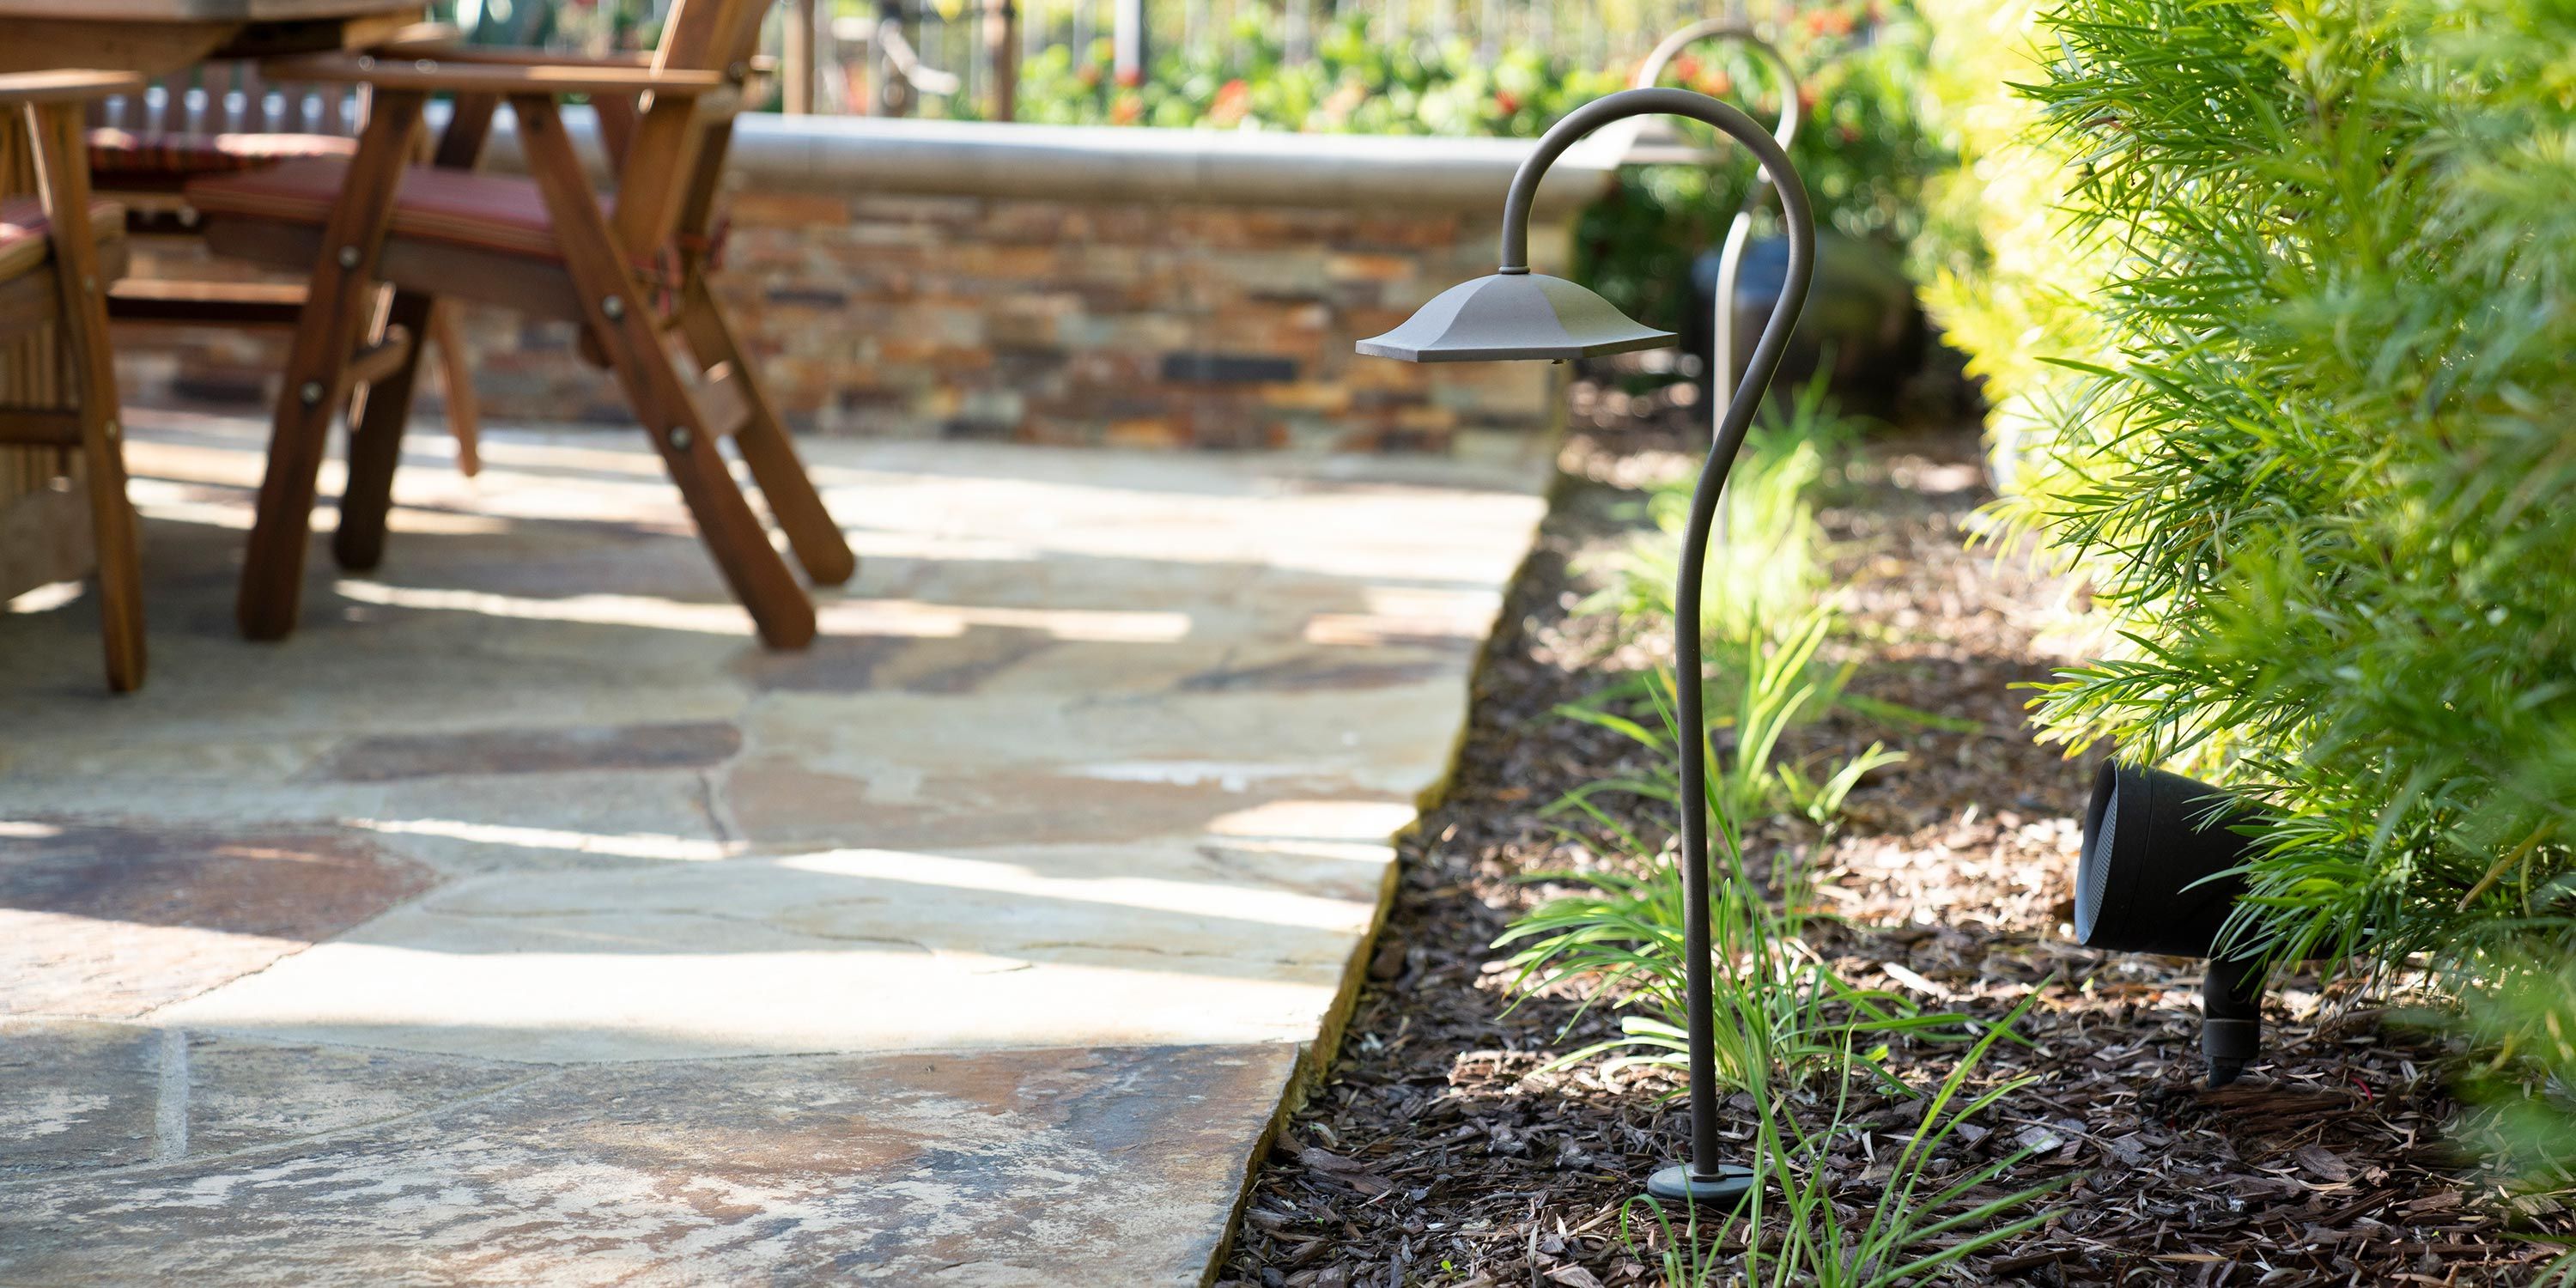 A close-up of a stylish outdoor garden light fixture next to a patio area with wooden chairs in the background.